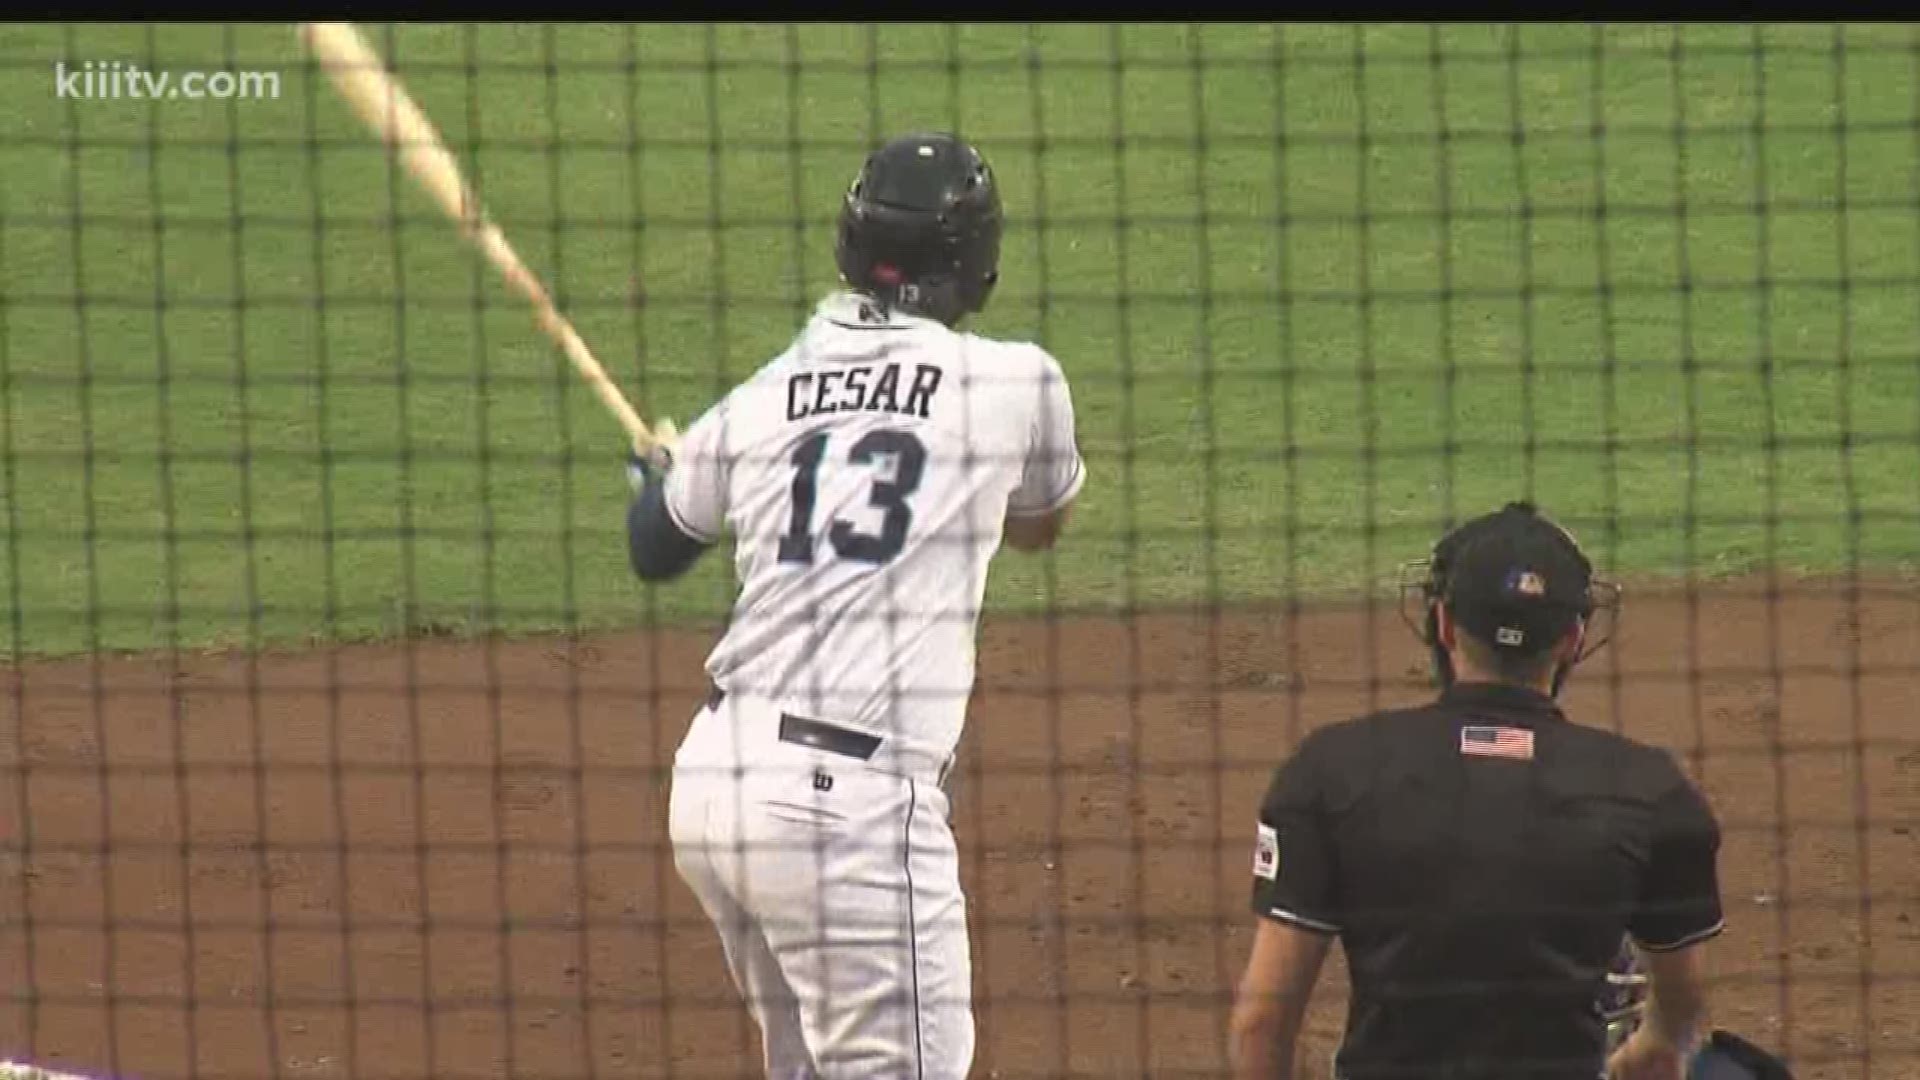 The Corpus Christi Hooks dropped it's final game of a four game series with the first place San Antonio Missions 5-1. Despite the loss, there was good news for the Hooks; Randy Cesar extended his minor league leading hitting streak to 34 games. 